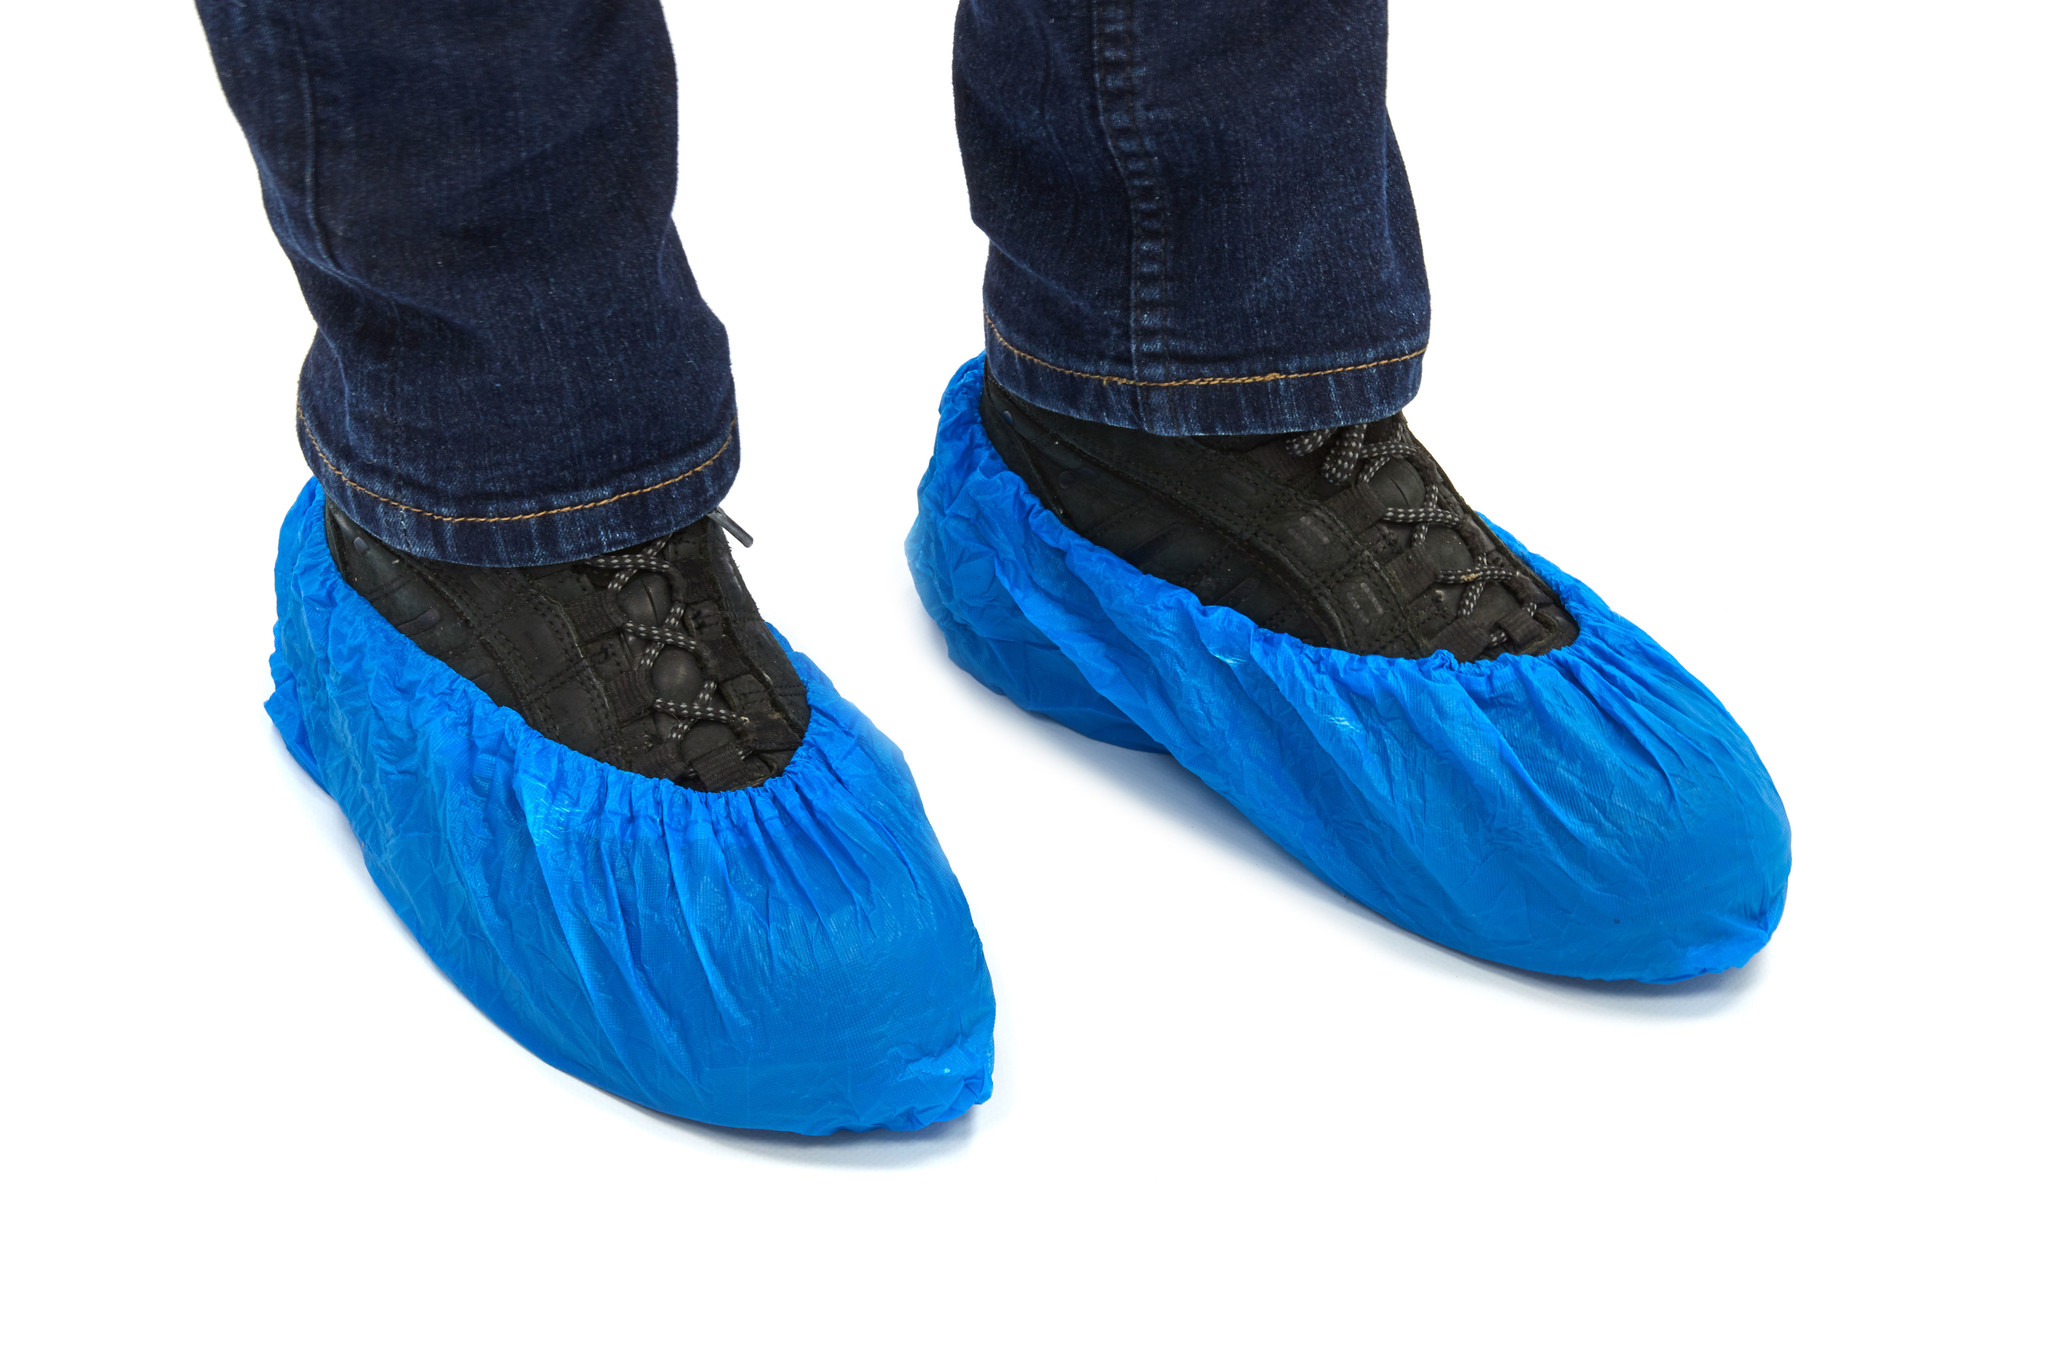 Buy Plastic Shoe Covers / Shoe Covers Online | 100 pieces - Degros